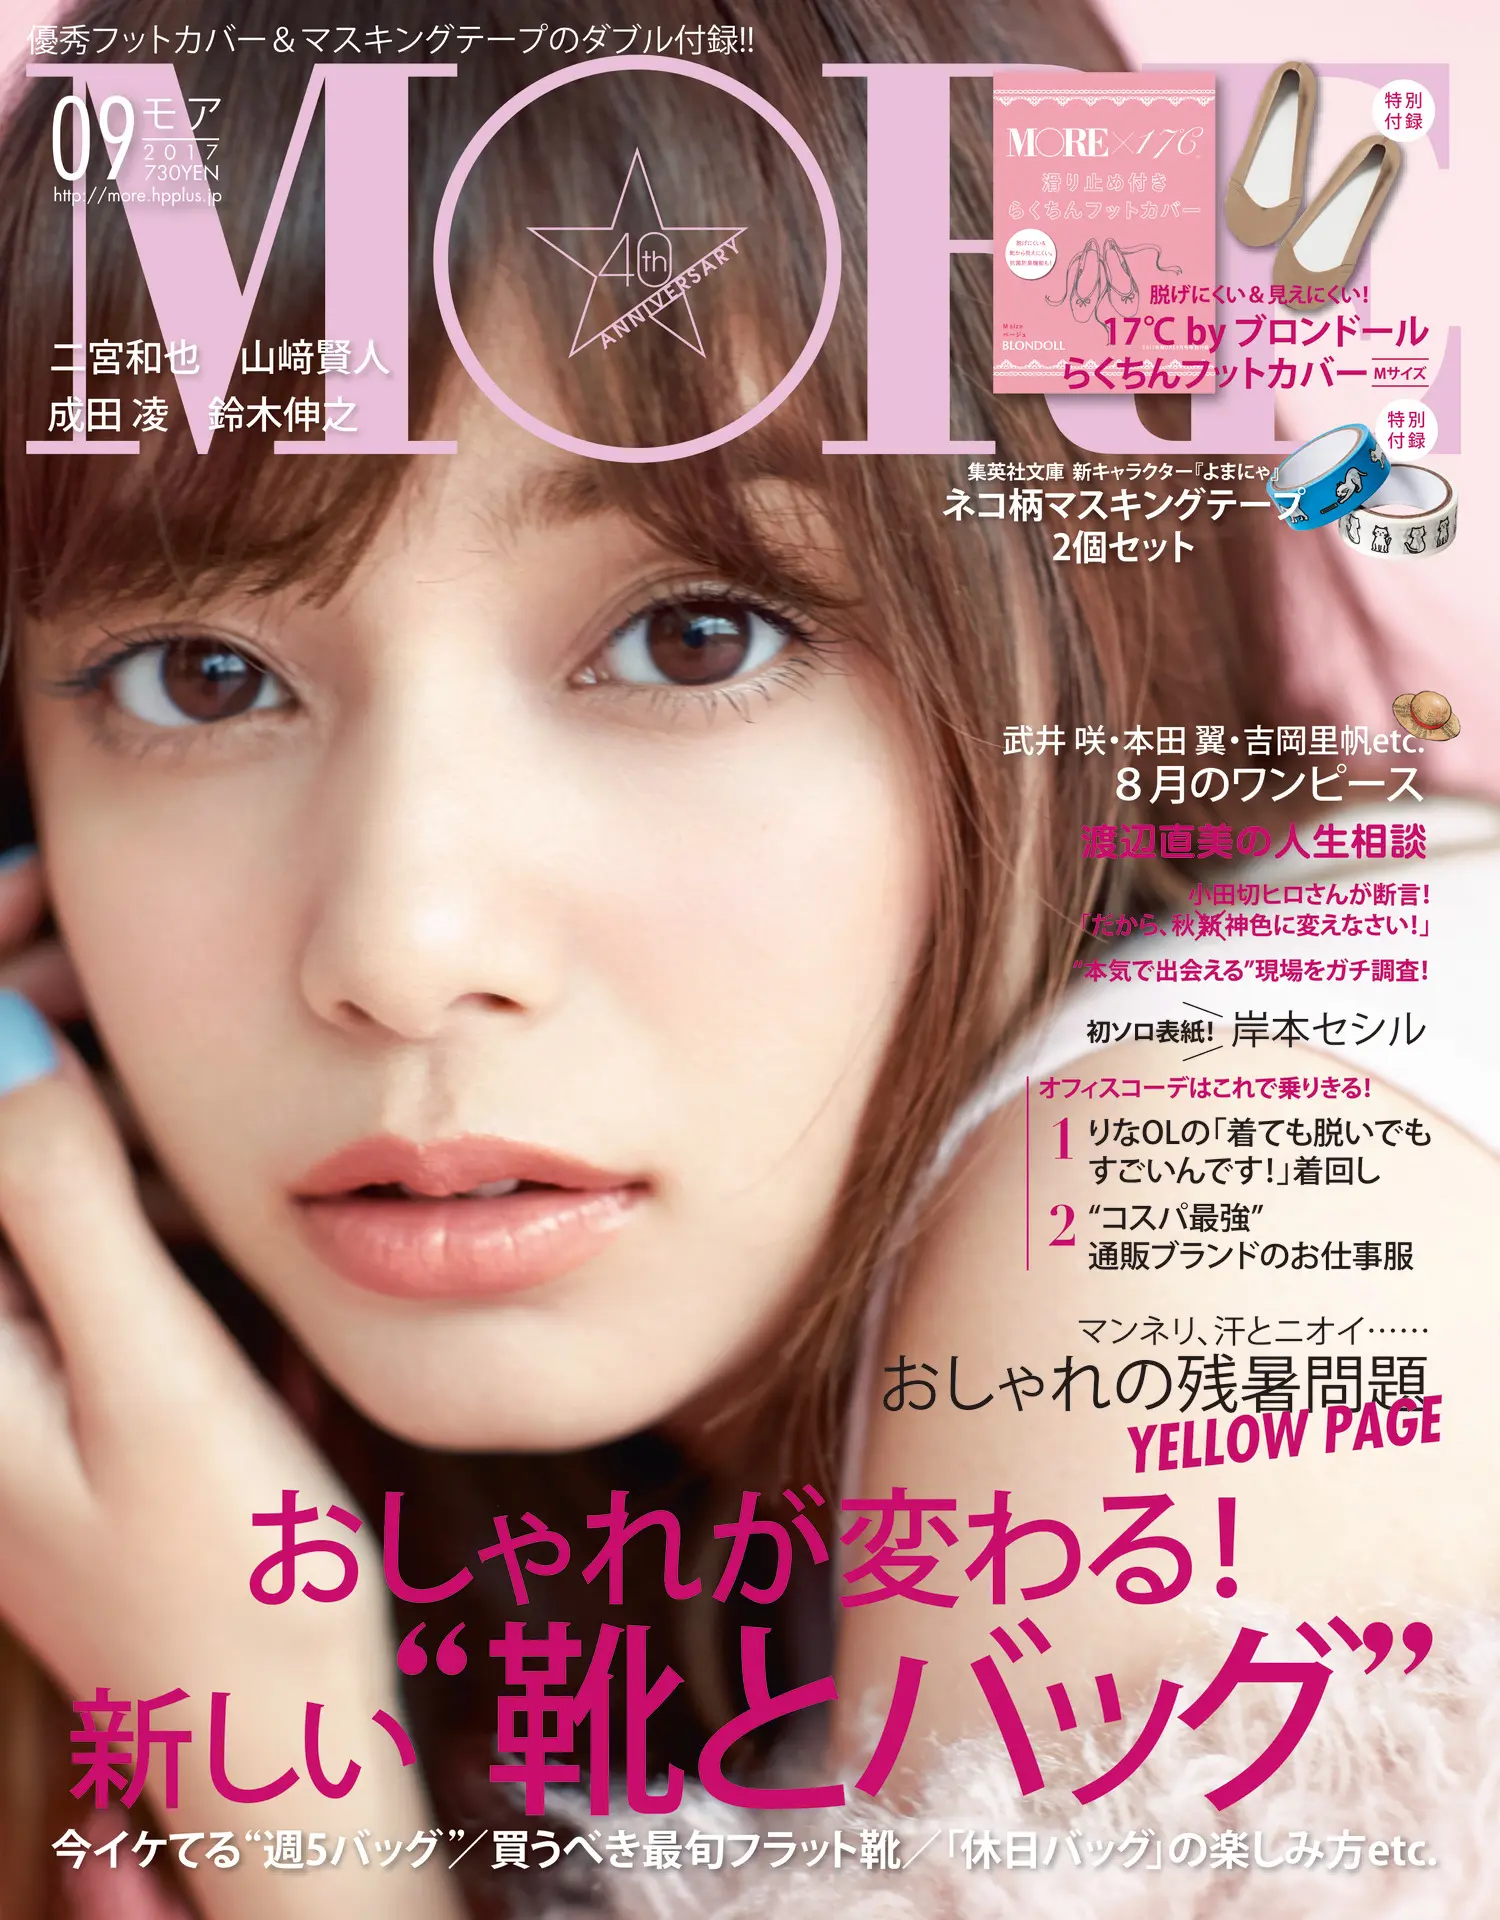 More９月号 雑誌 More 試し読み Daily More